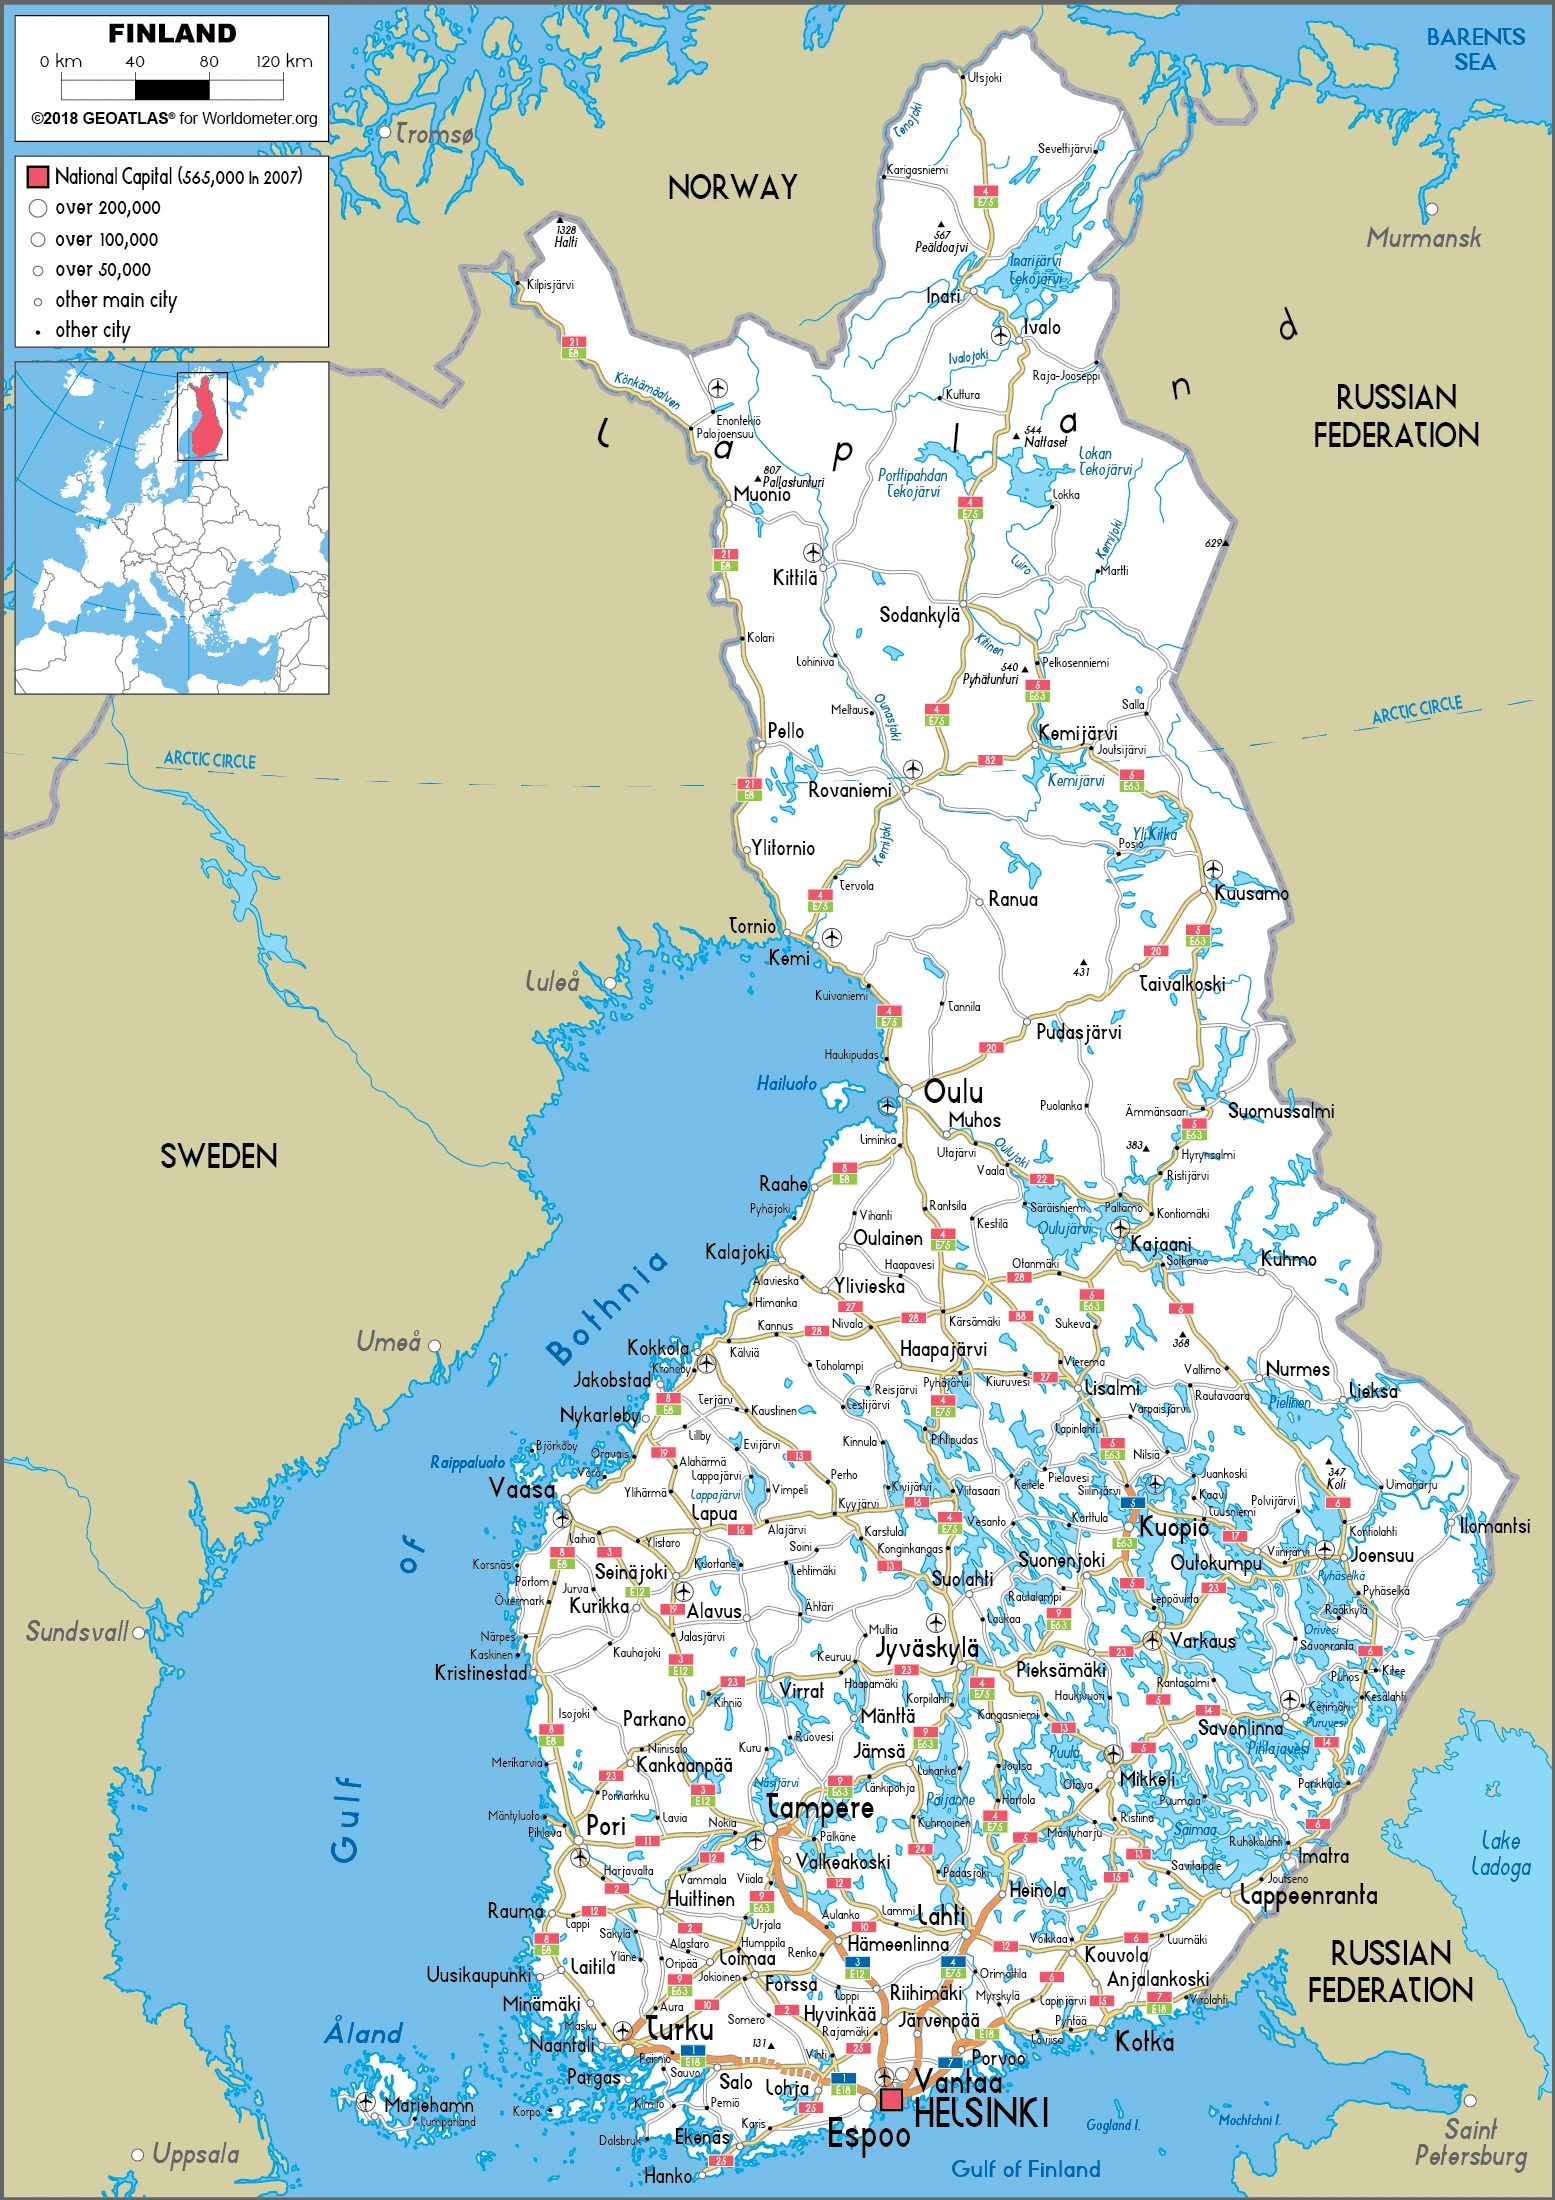 The route plan of the Finnish roadways.